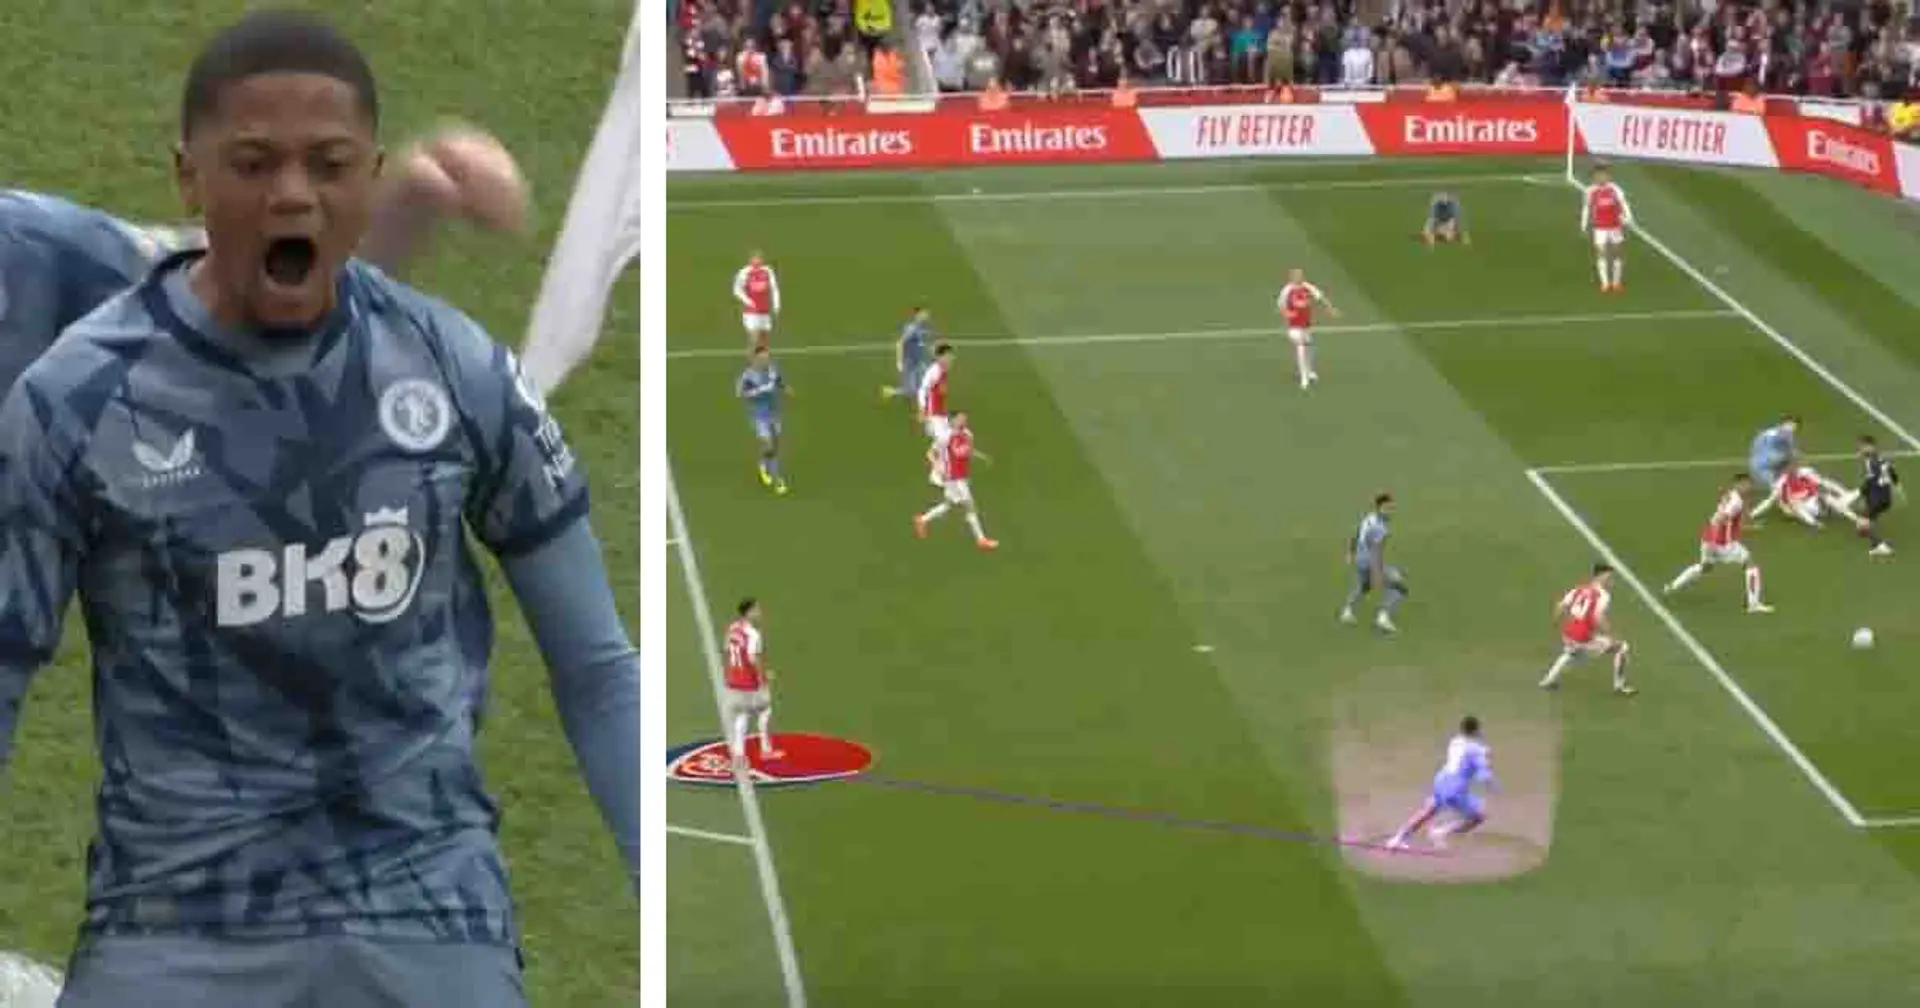 One player at fault for Leon Bailey’s goal against Arsenal – shown in pics